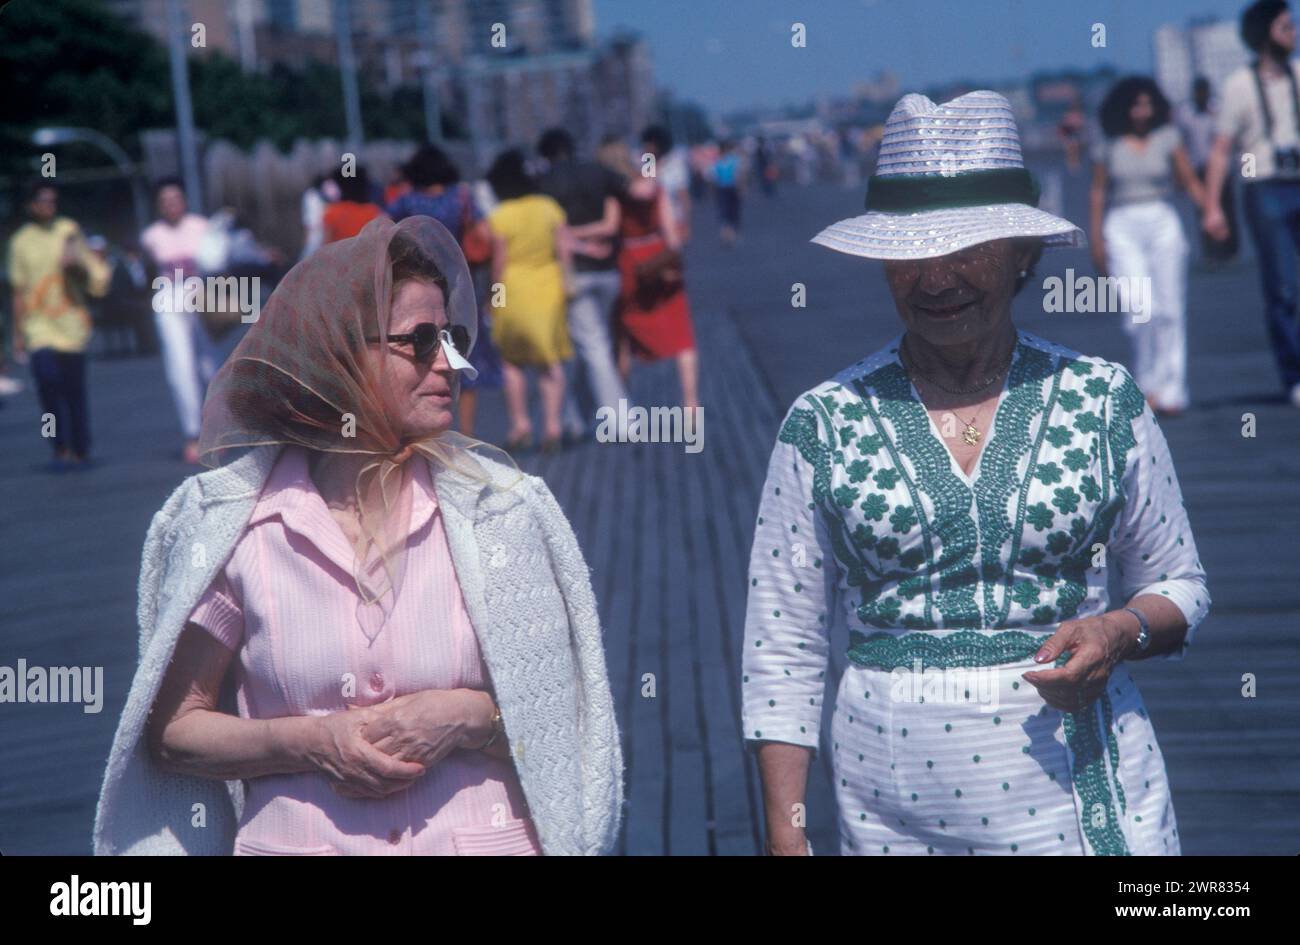 Retro 1980s Nose Sun Shield. Two women on vacation one wears a popular fashionable sunshield for her nose attached to her sunglasses.  1980s Coney Island  Brooklyn, New York City US 27th June 1981 USA HOMER SYKES Stock Photo